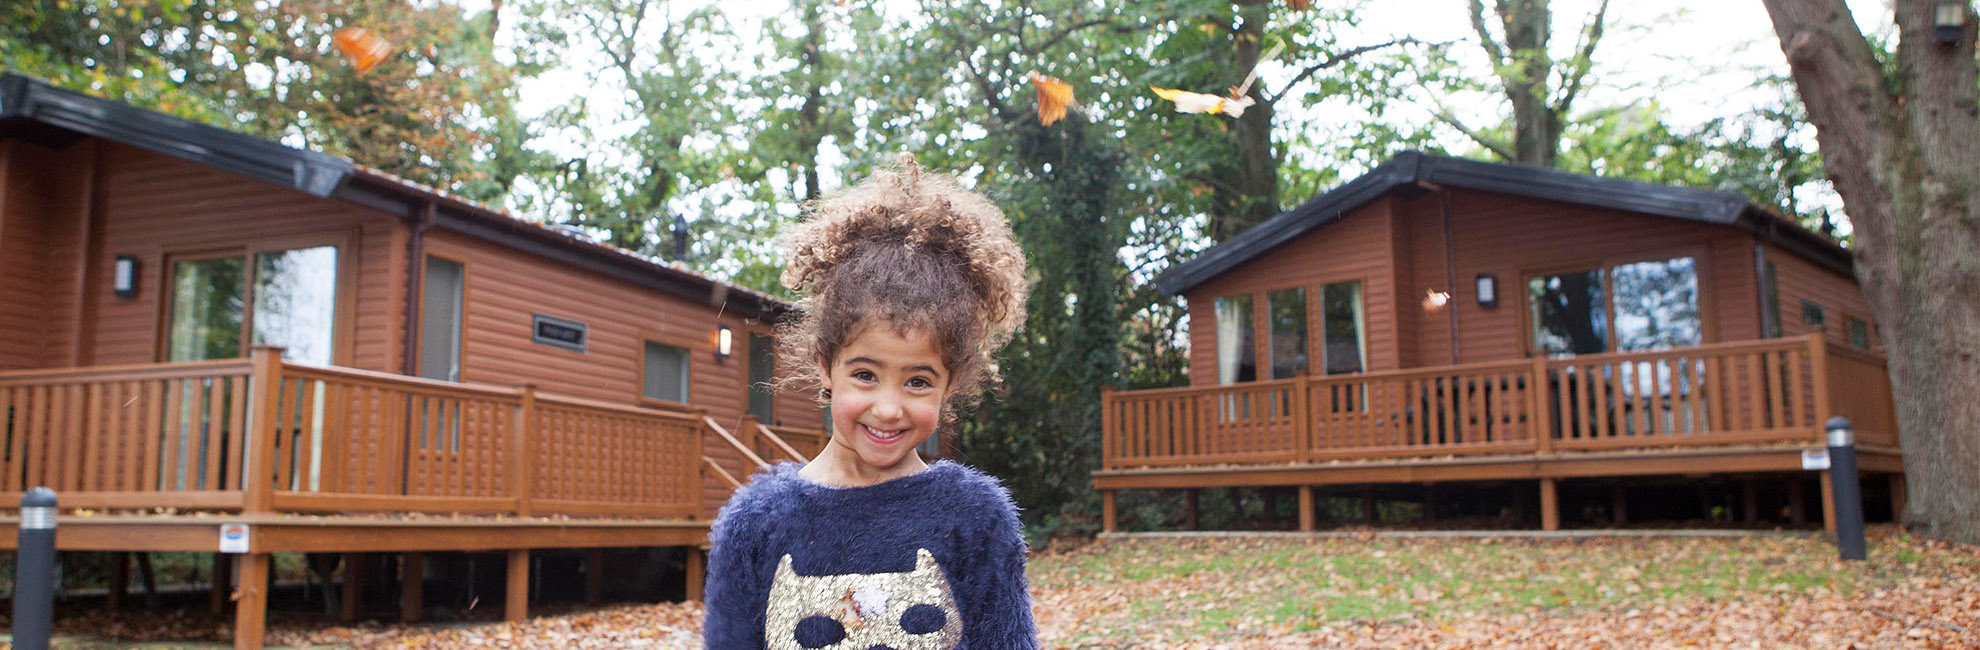 A girl smiling outside wooden lodges in the autumn